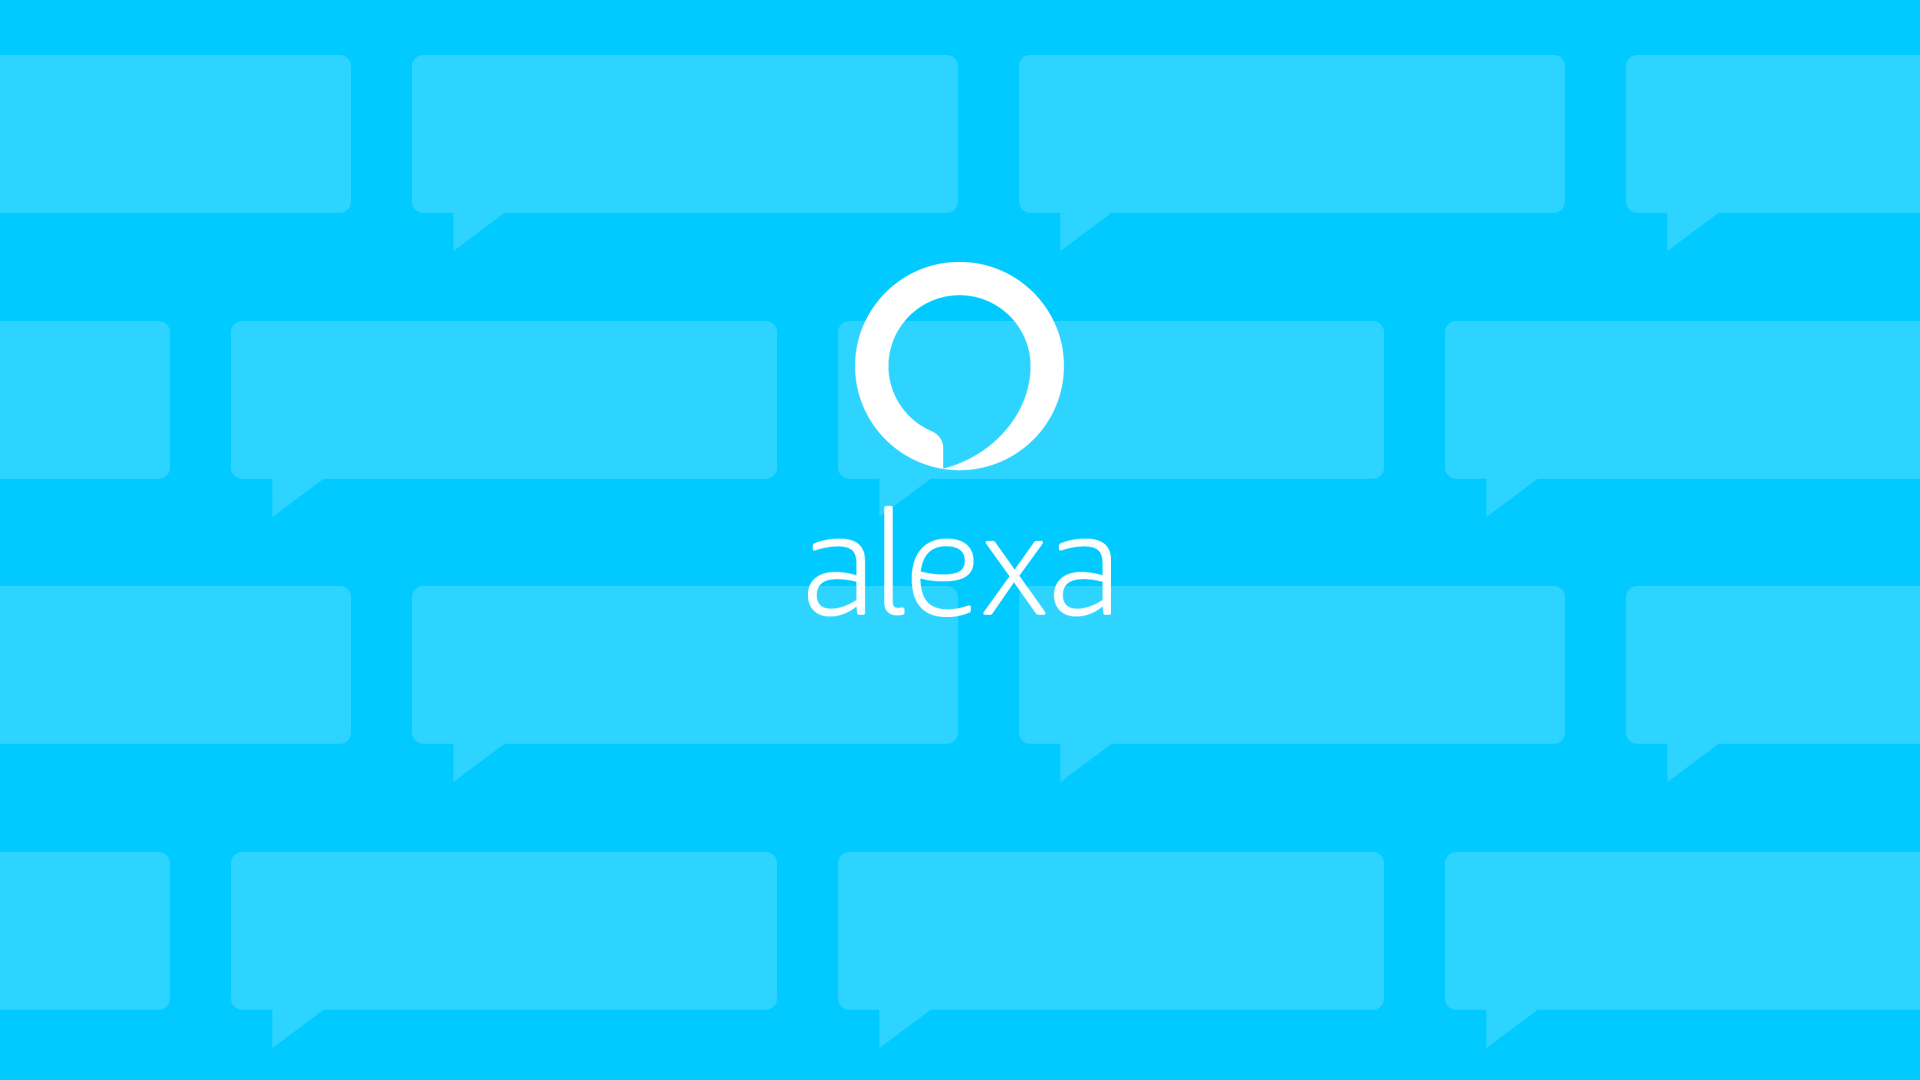 where can i find the alexa app